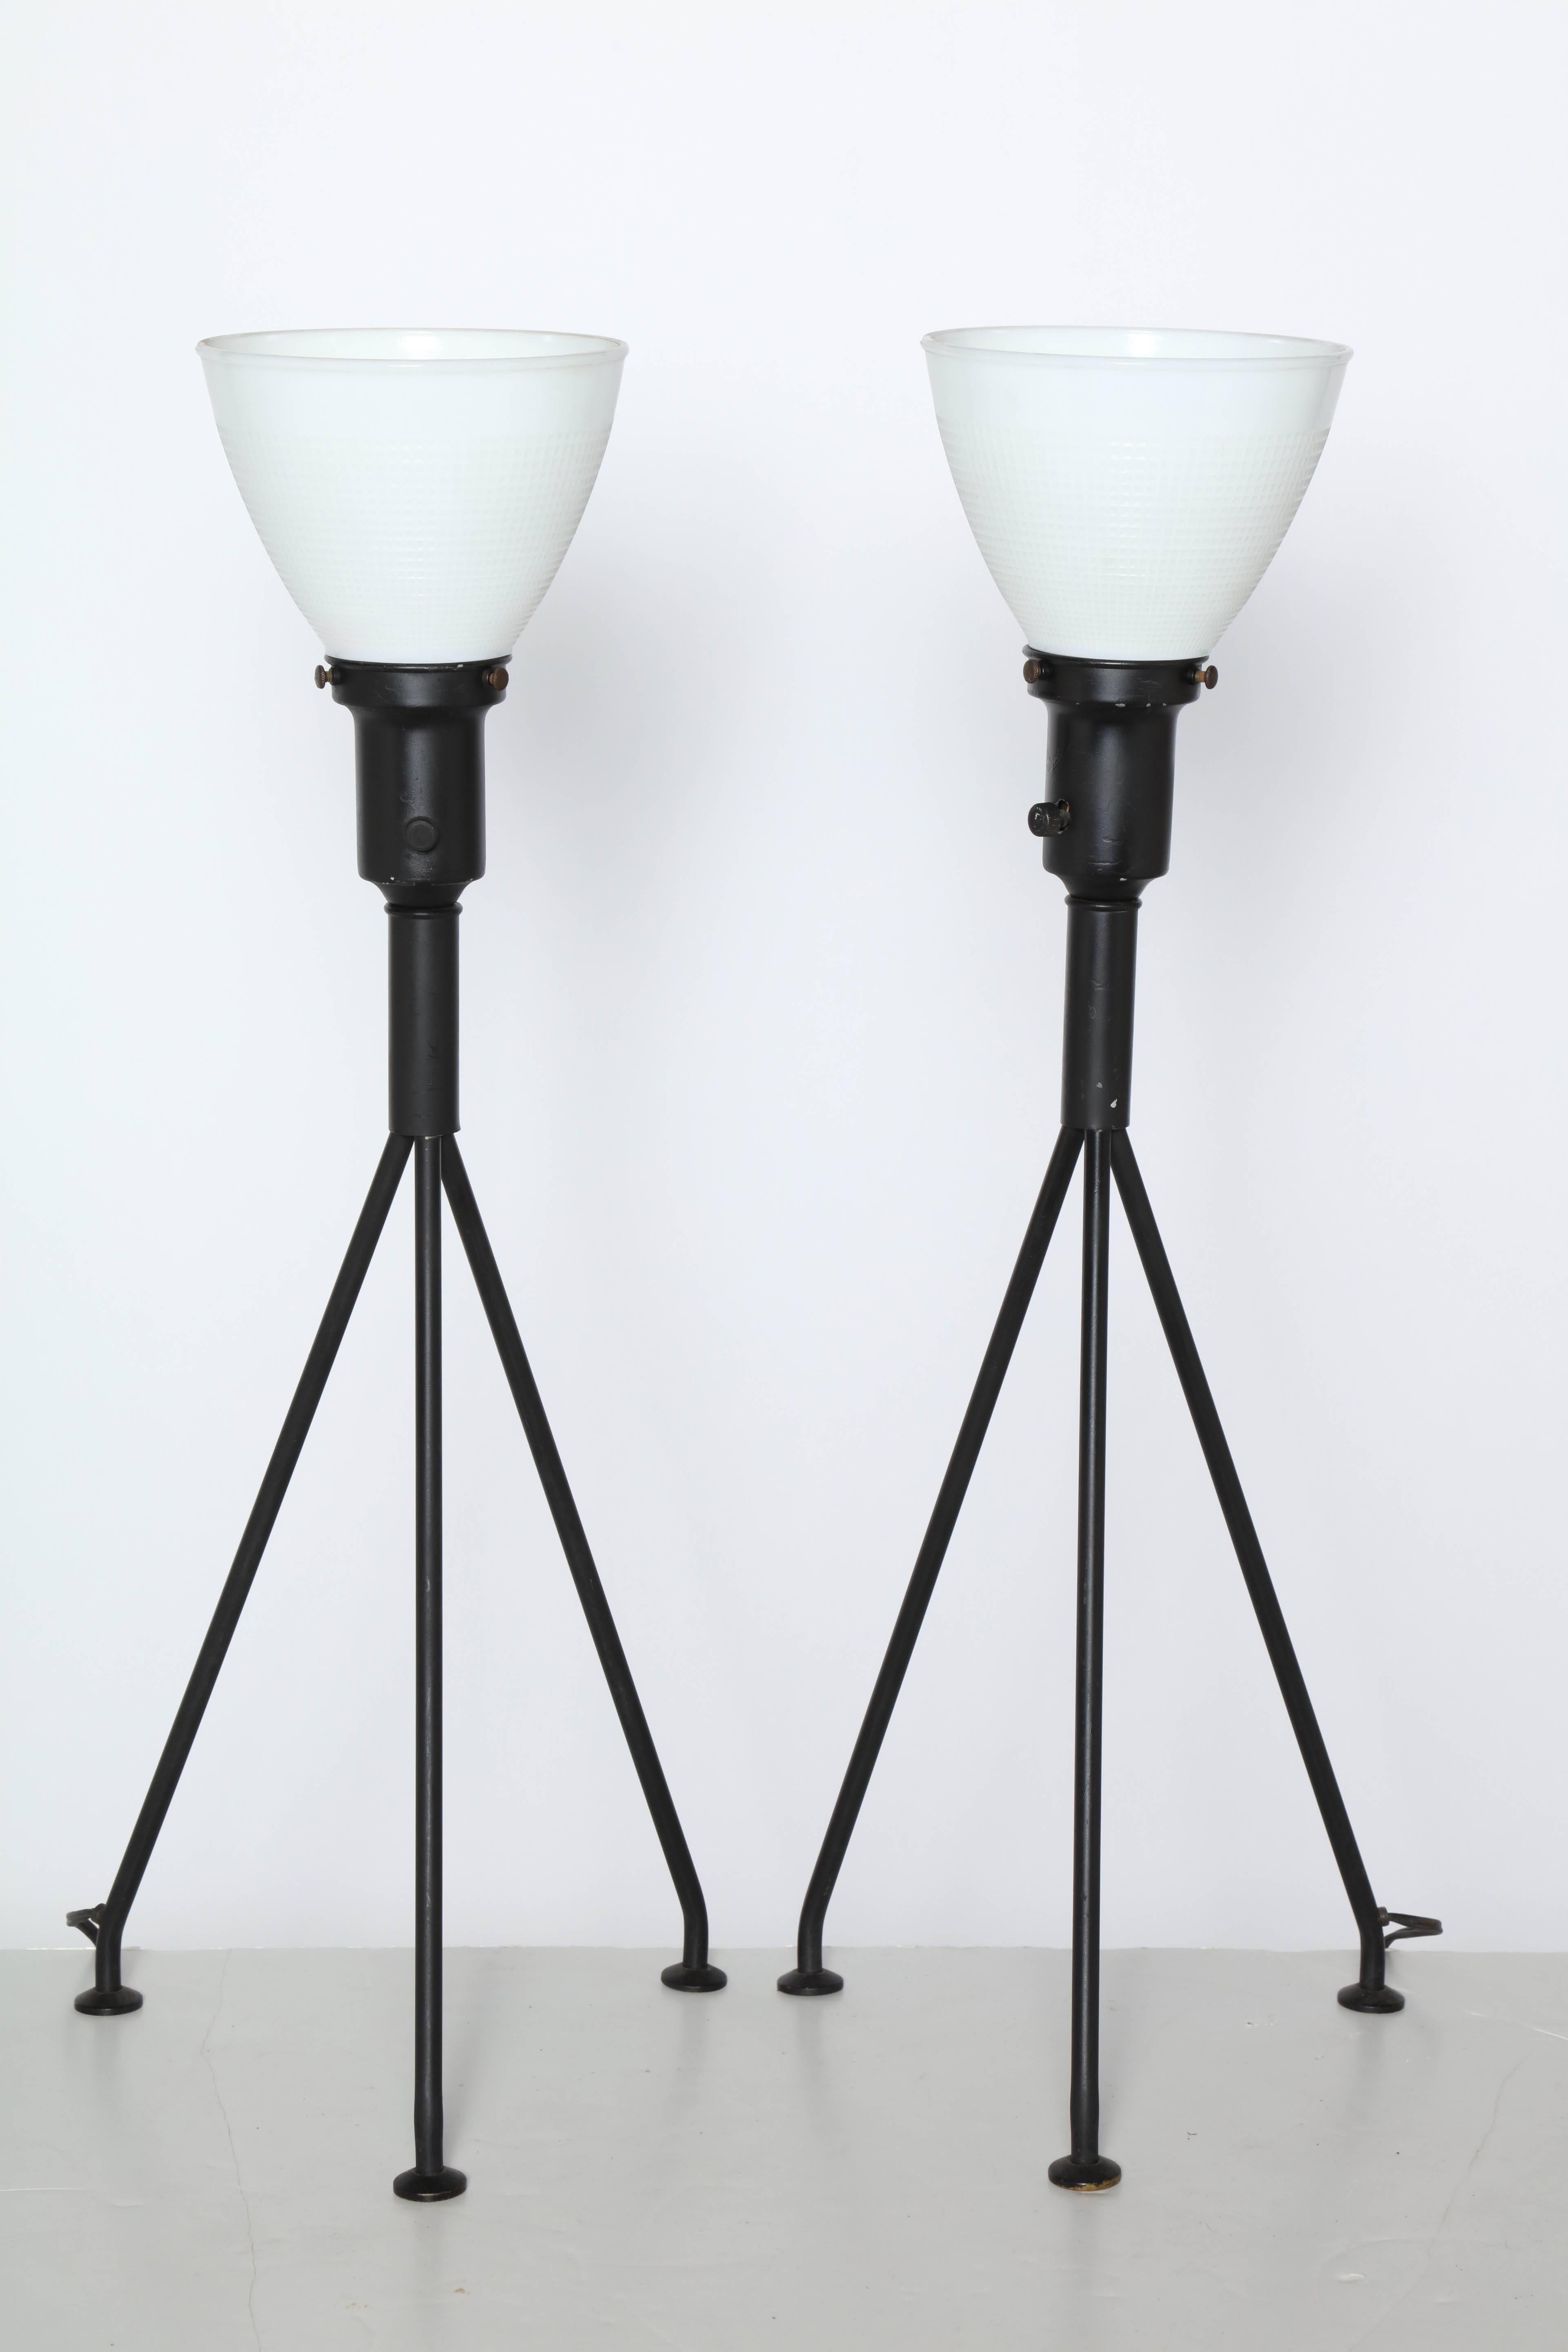 Painted Pair of Gerald Thurston Black Iron Tripod Table Lamps with White Glass Shades